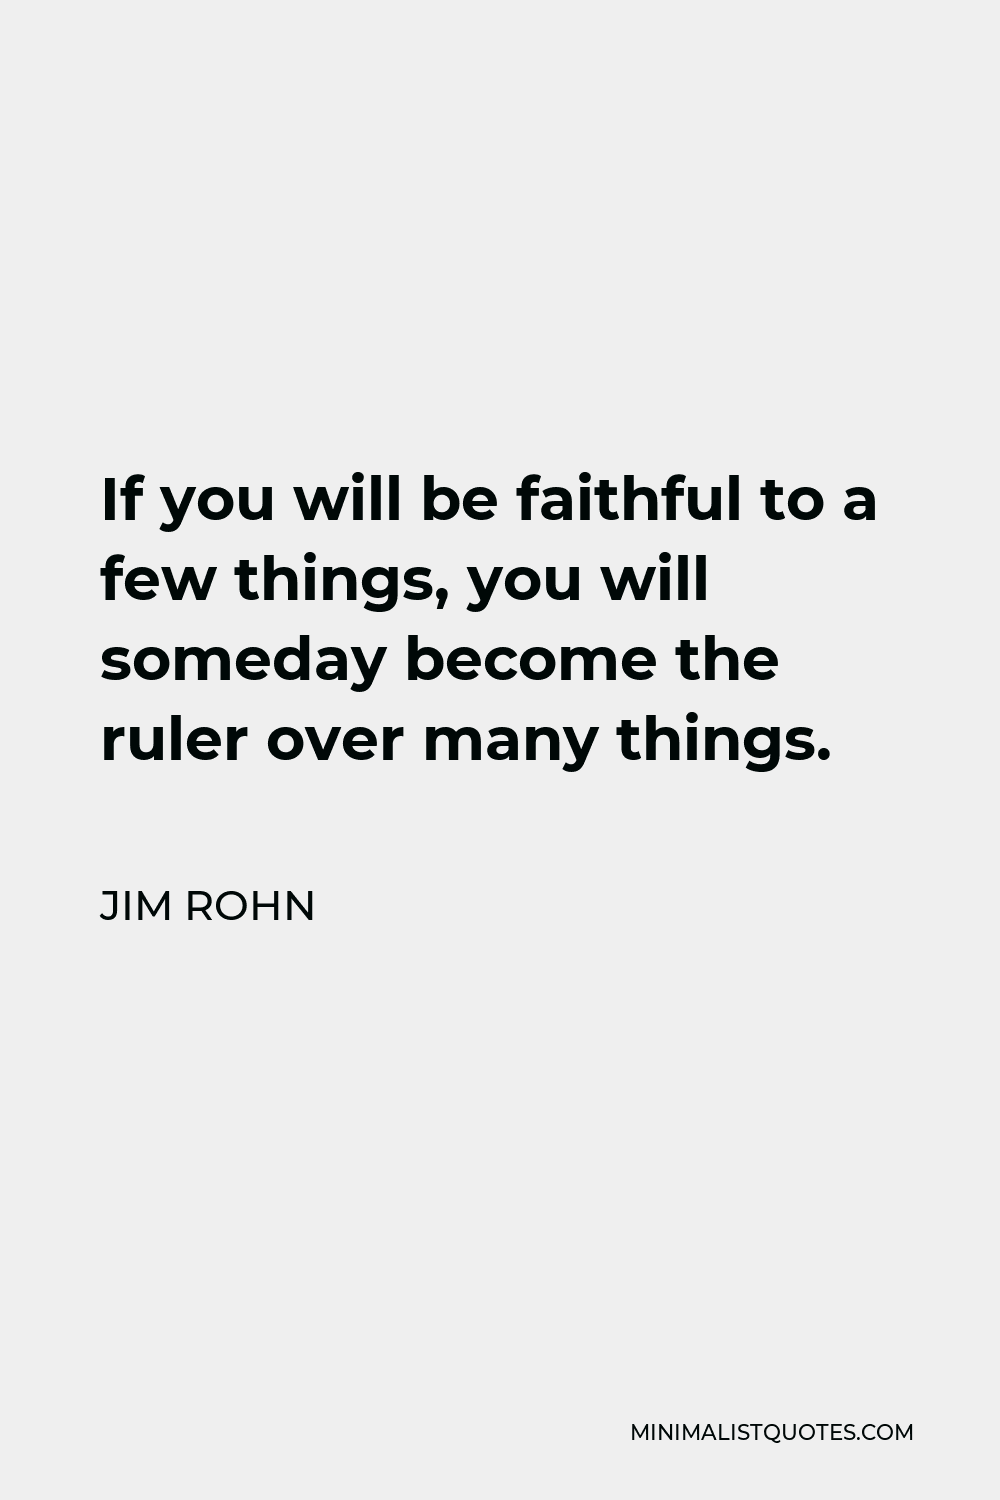 Jim Rohn Quote - If you will be faithful to a few things, you will someday become the ruler over many things.